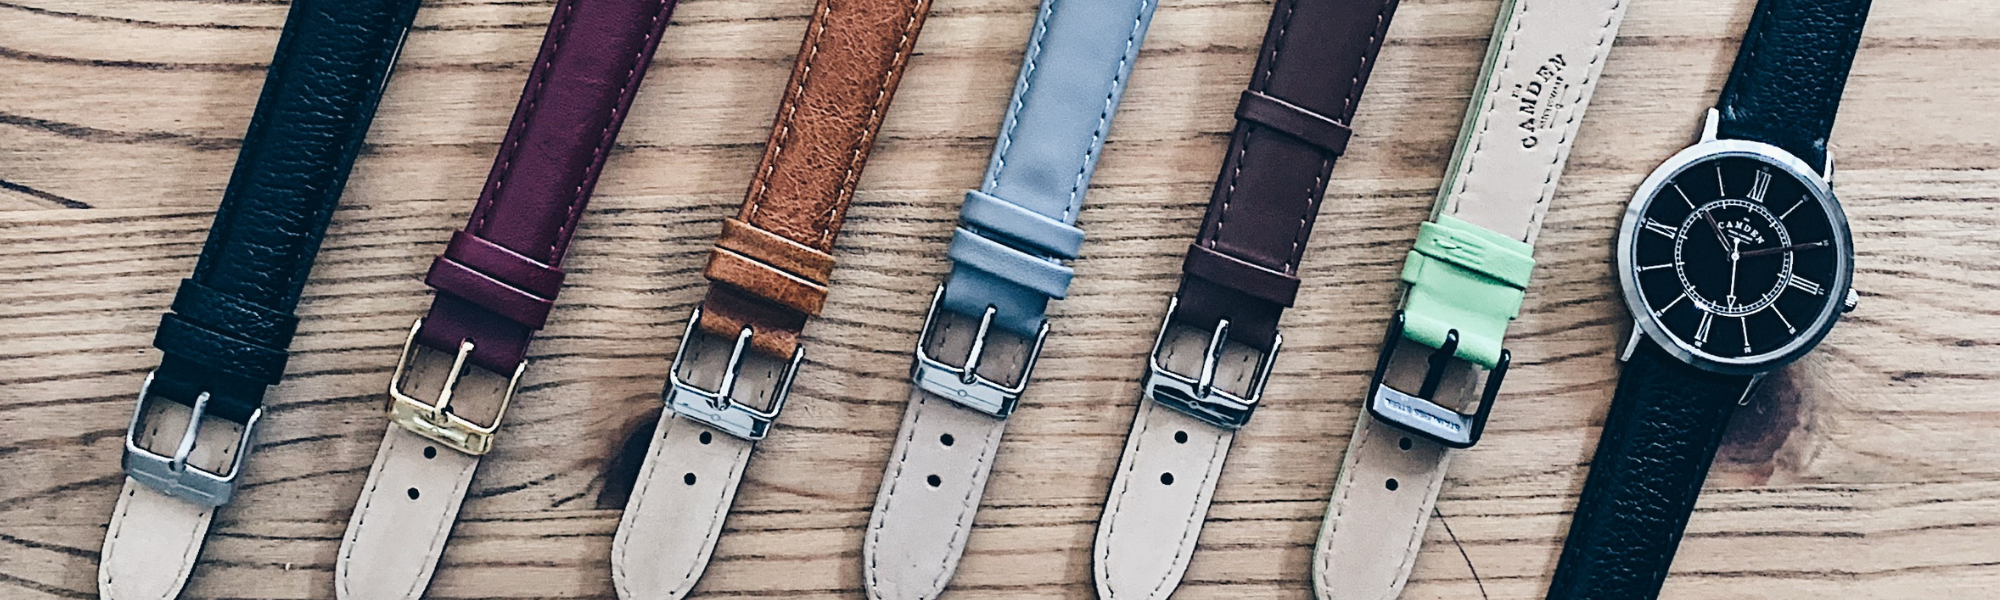 Leather watch straps for your No.27 Camden Watch